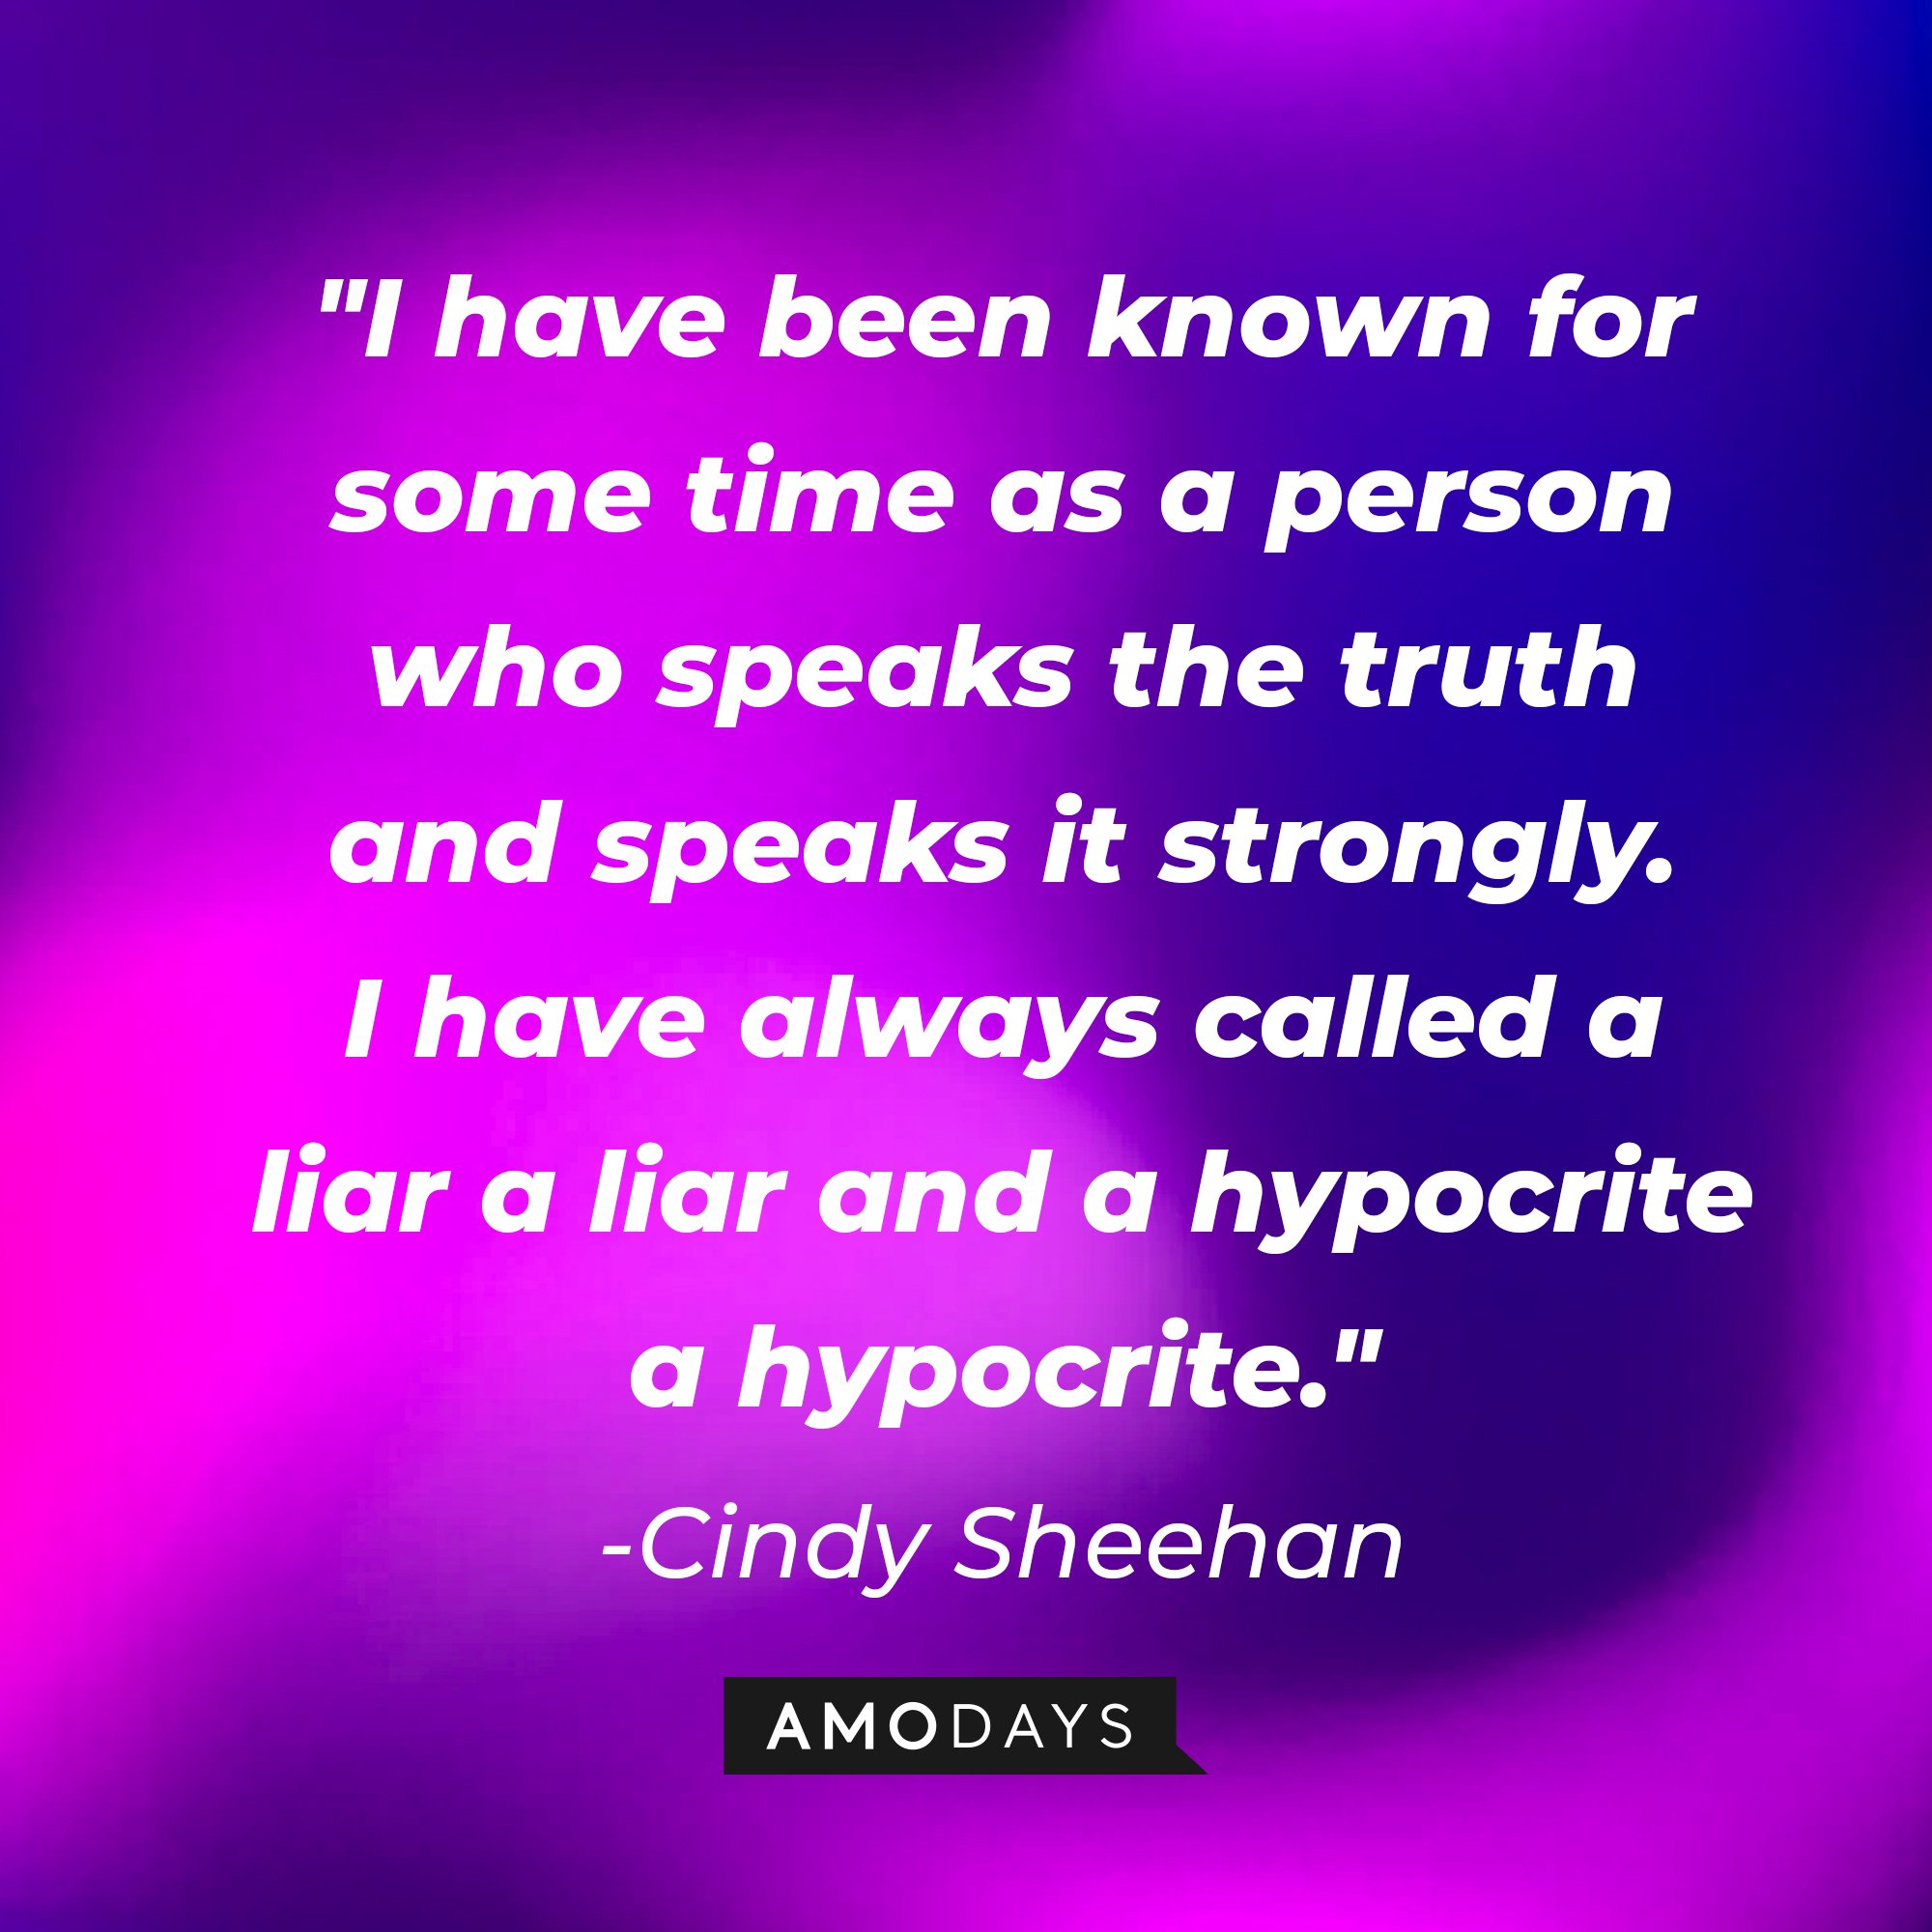 Cindy Sheehan's quote:\\\\\\\\\\\\\\\\u00a0"I have been known for some time as a person who speaks the truth and speaks it strongly. I have always called a liar a liar and a hypocrite a hypocrite."\\\\\\\\\\\\\\\\u00a0| Image: AmoDays